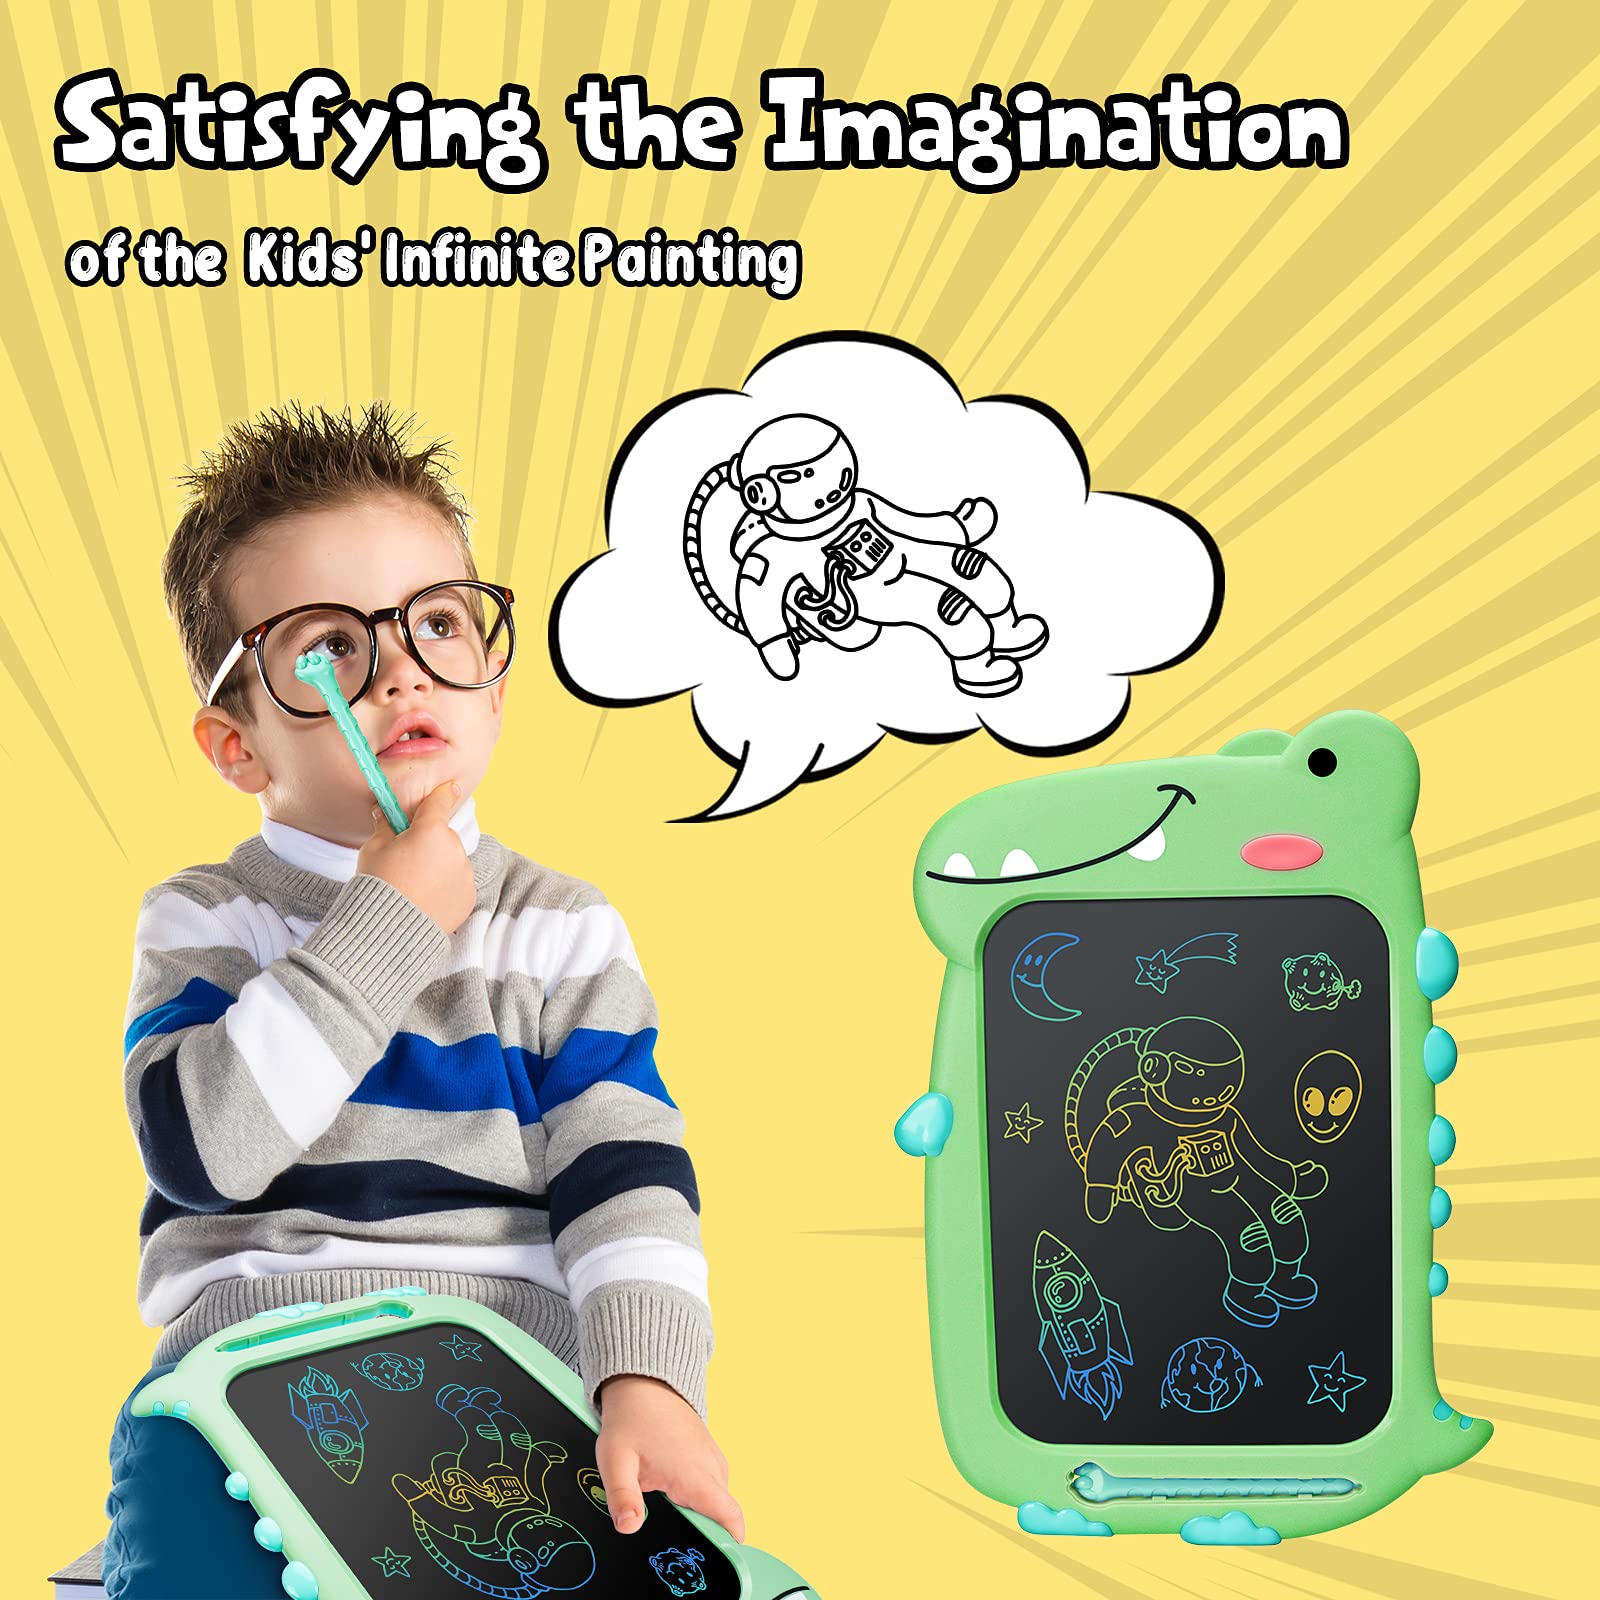 LCD Writing Tablet Kids Toys - 10 Inch Learning Drawing Board Dinosaur Toys for 3 4 5 6 7 8 Year Old Boys Girls Birthday Gifts, Toddler Educational Doodle Pad Christmas Stocking Stuffers for Kids